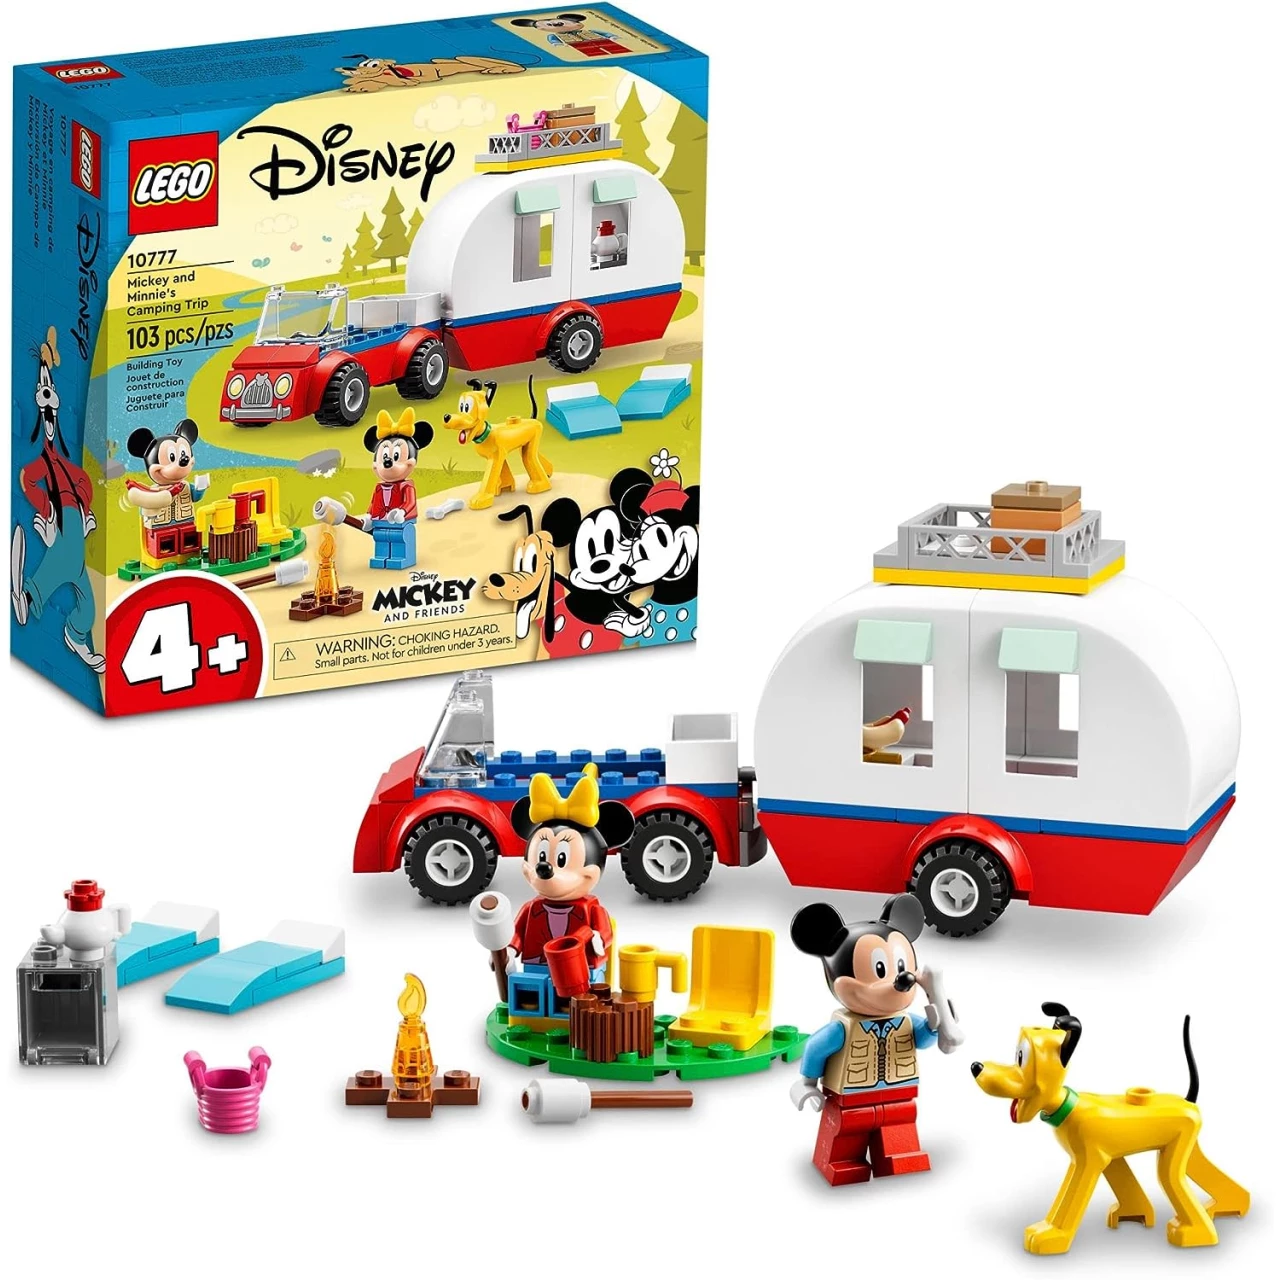 LEGO Disney Mickey Mouse and Minnie Mouse&rsquo;s Camping Trip Building Toy